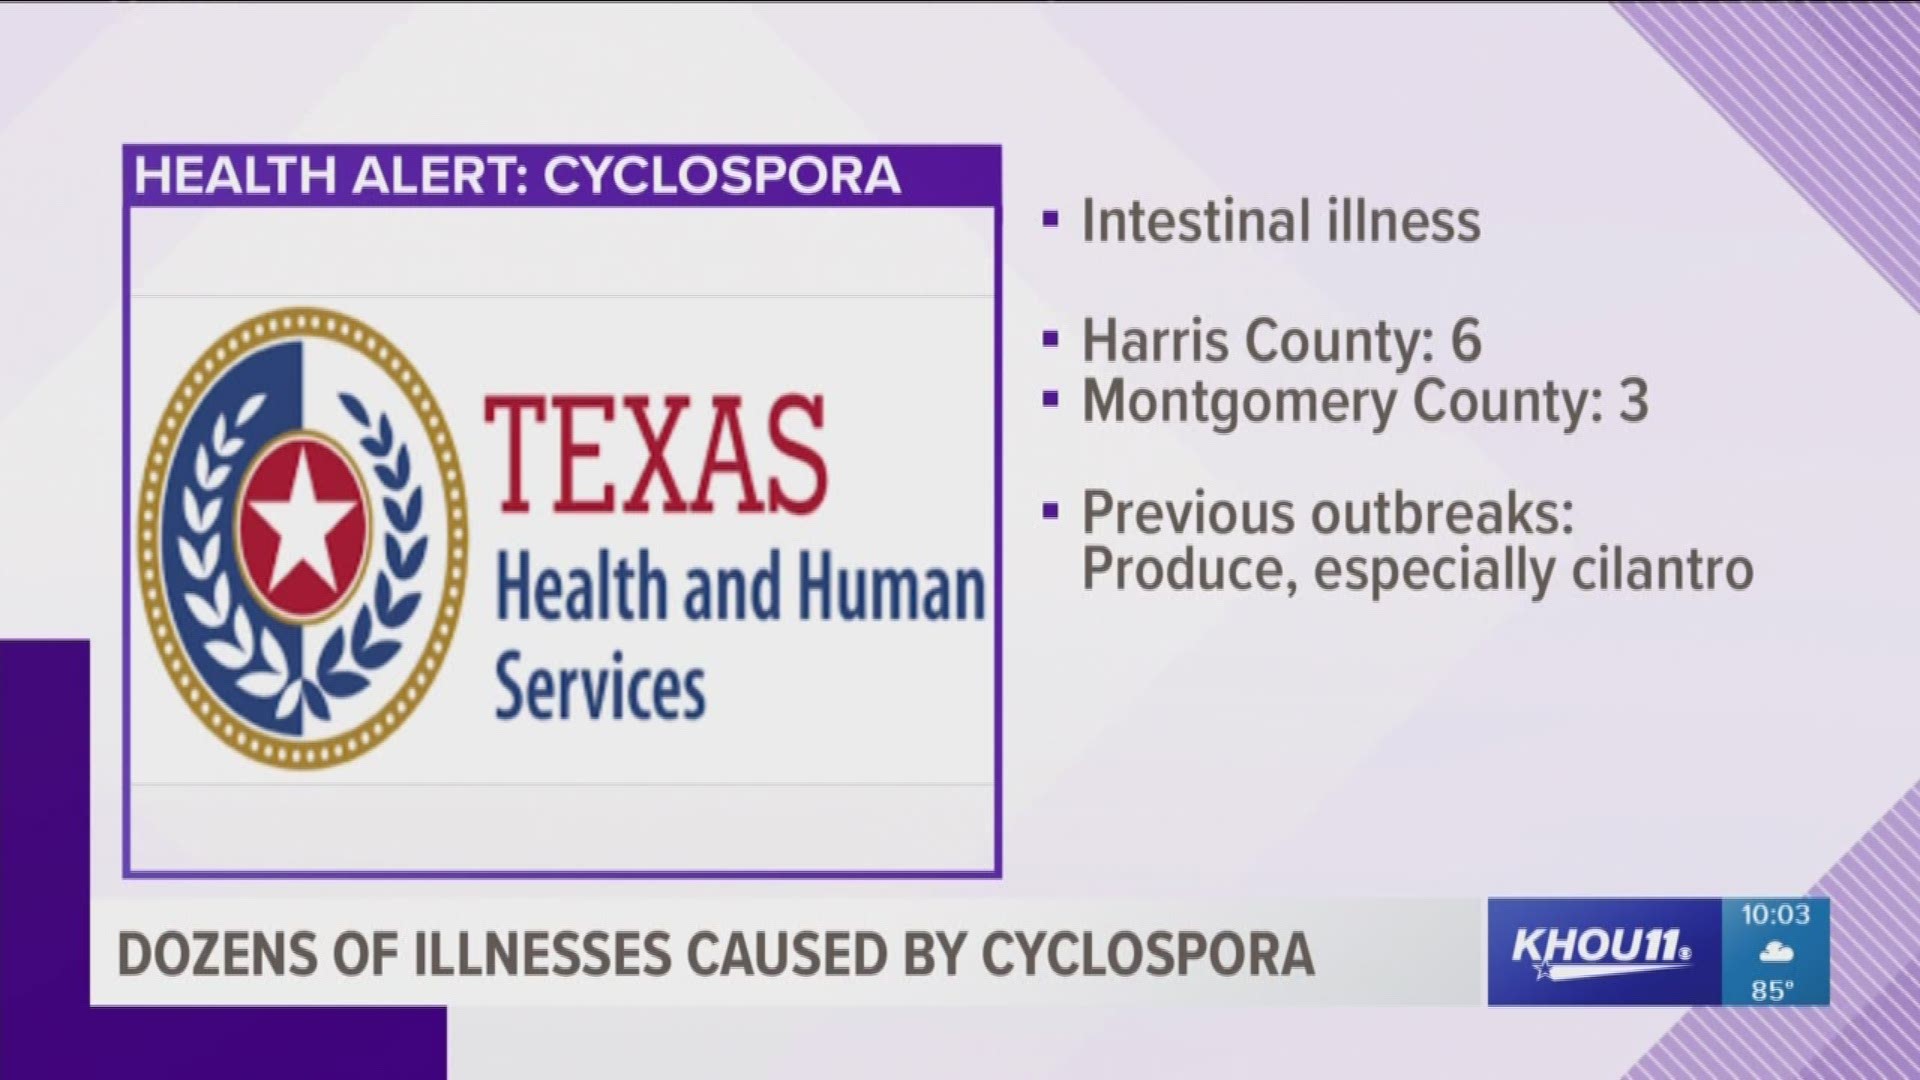 Nearly five dozen people across Texas gave gotten sick by the parasite cyclospora. Cyclospora is an intestinal illness caused by consuming contaminated food or water. 